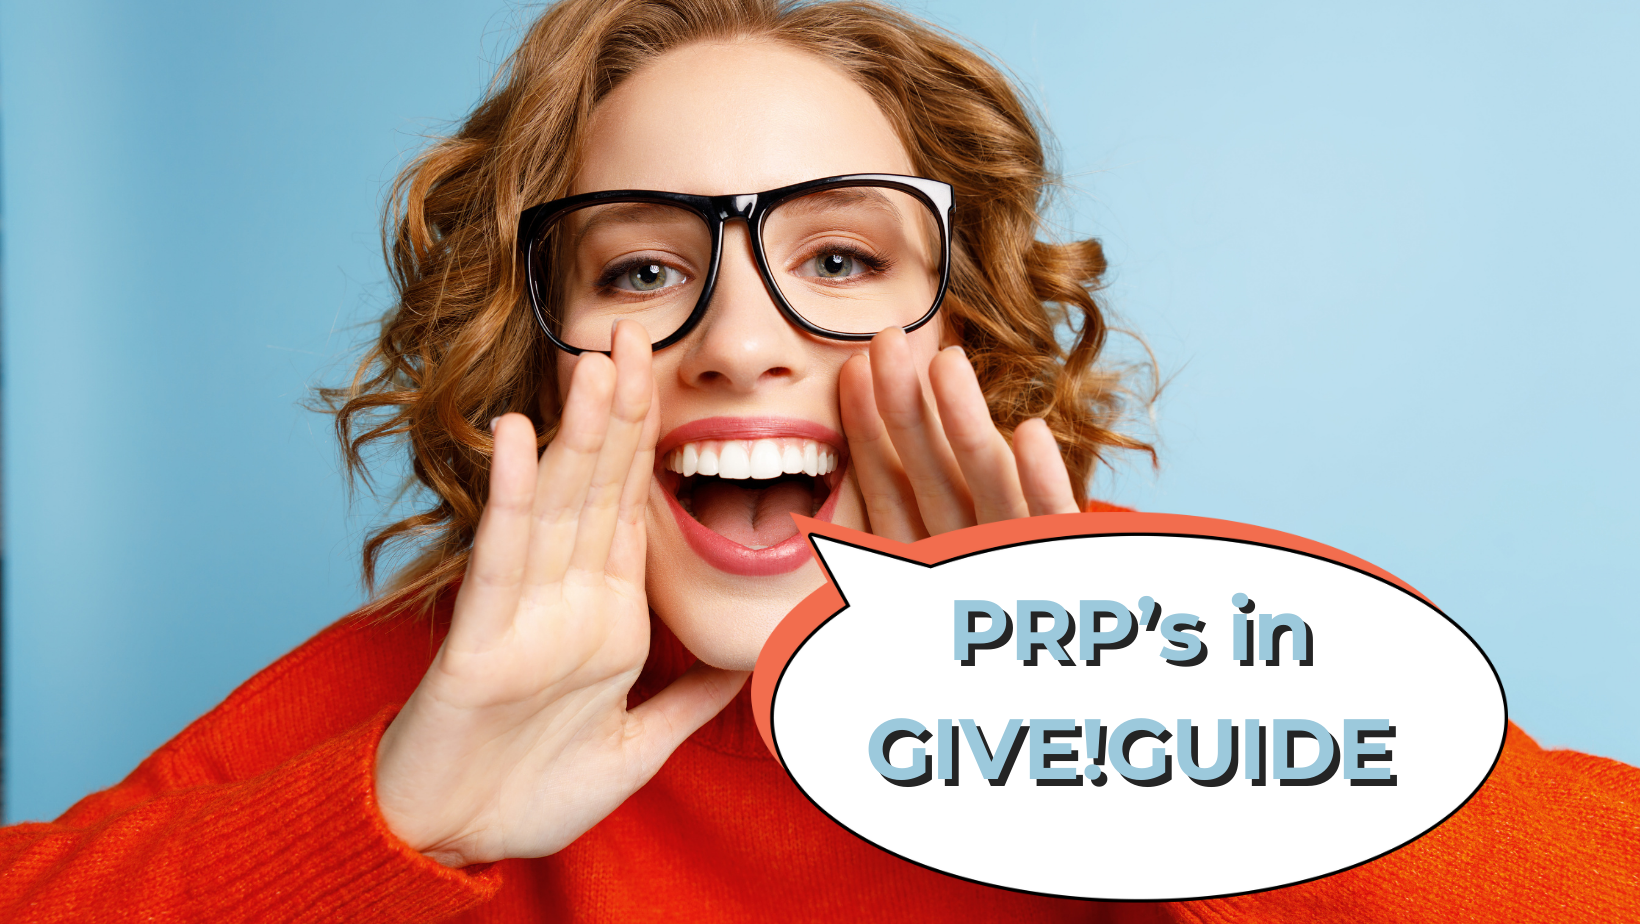 PRP’s in Give!Guide…